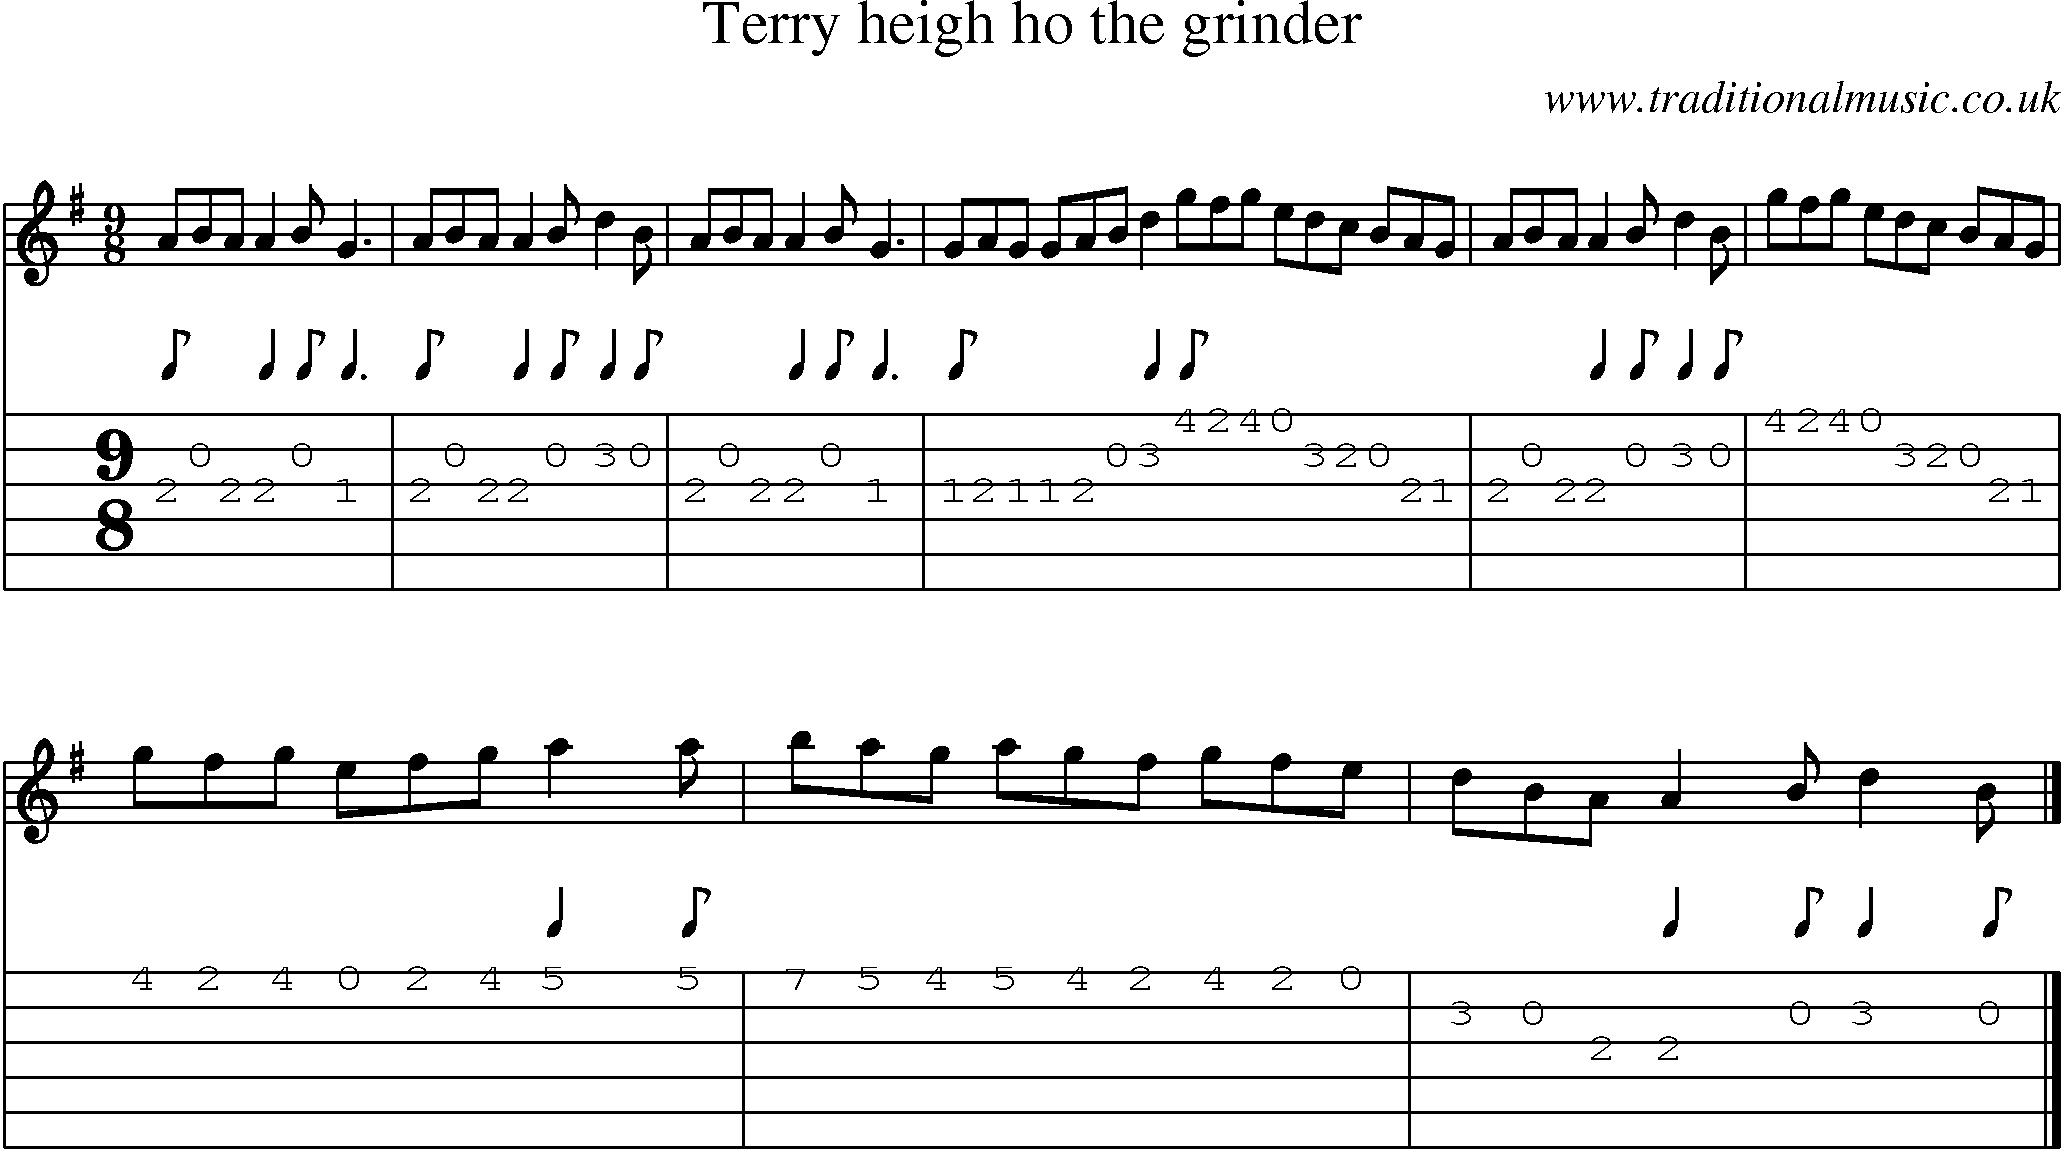 Music Score and Guitar Tabs for Terry Heigh Ho The Grinder